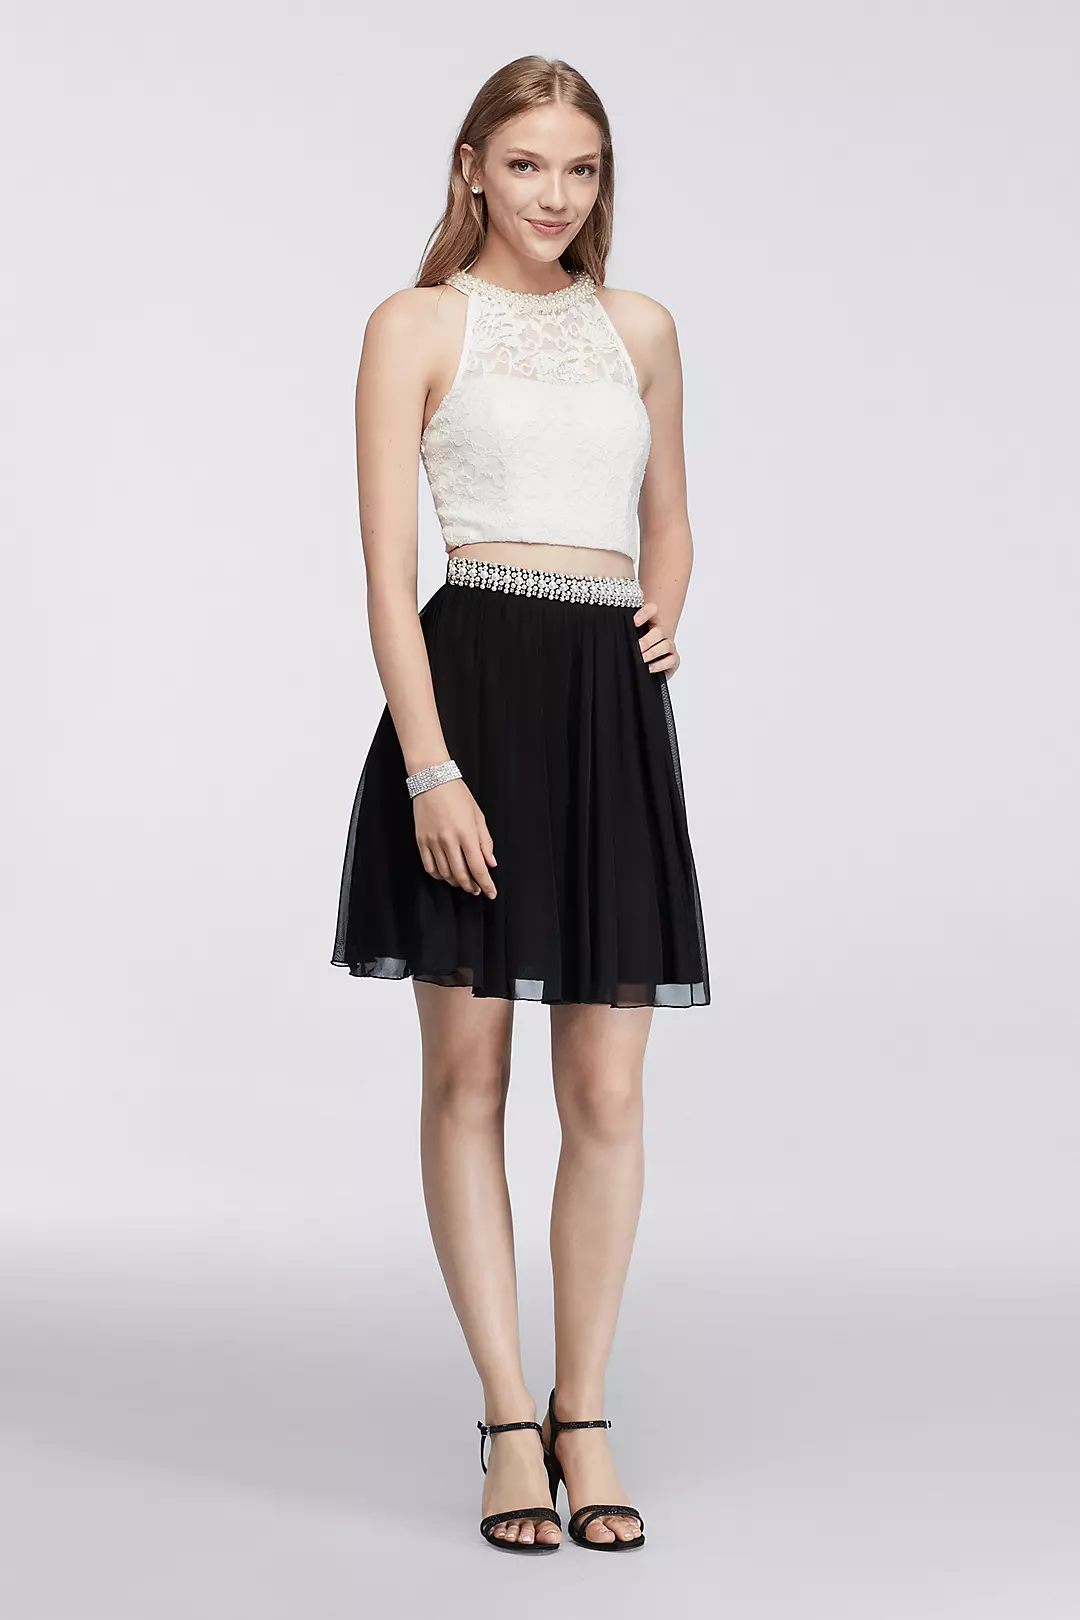 Pearl-Embellished Lace Crop Top and Chiffon Skirt Image